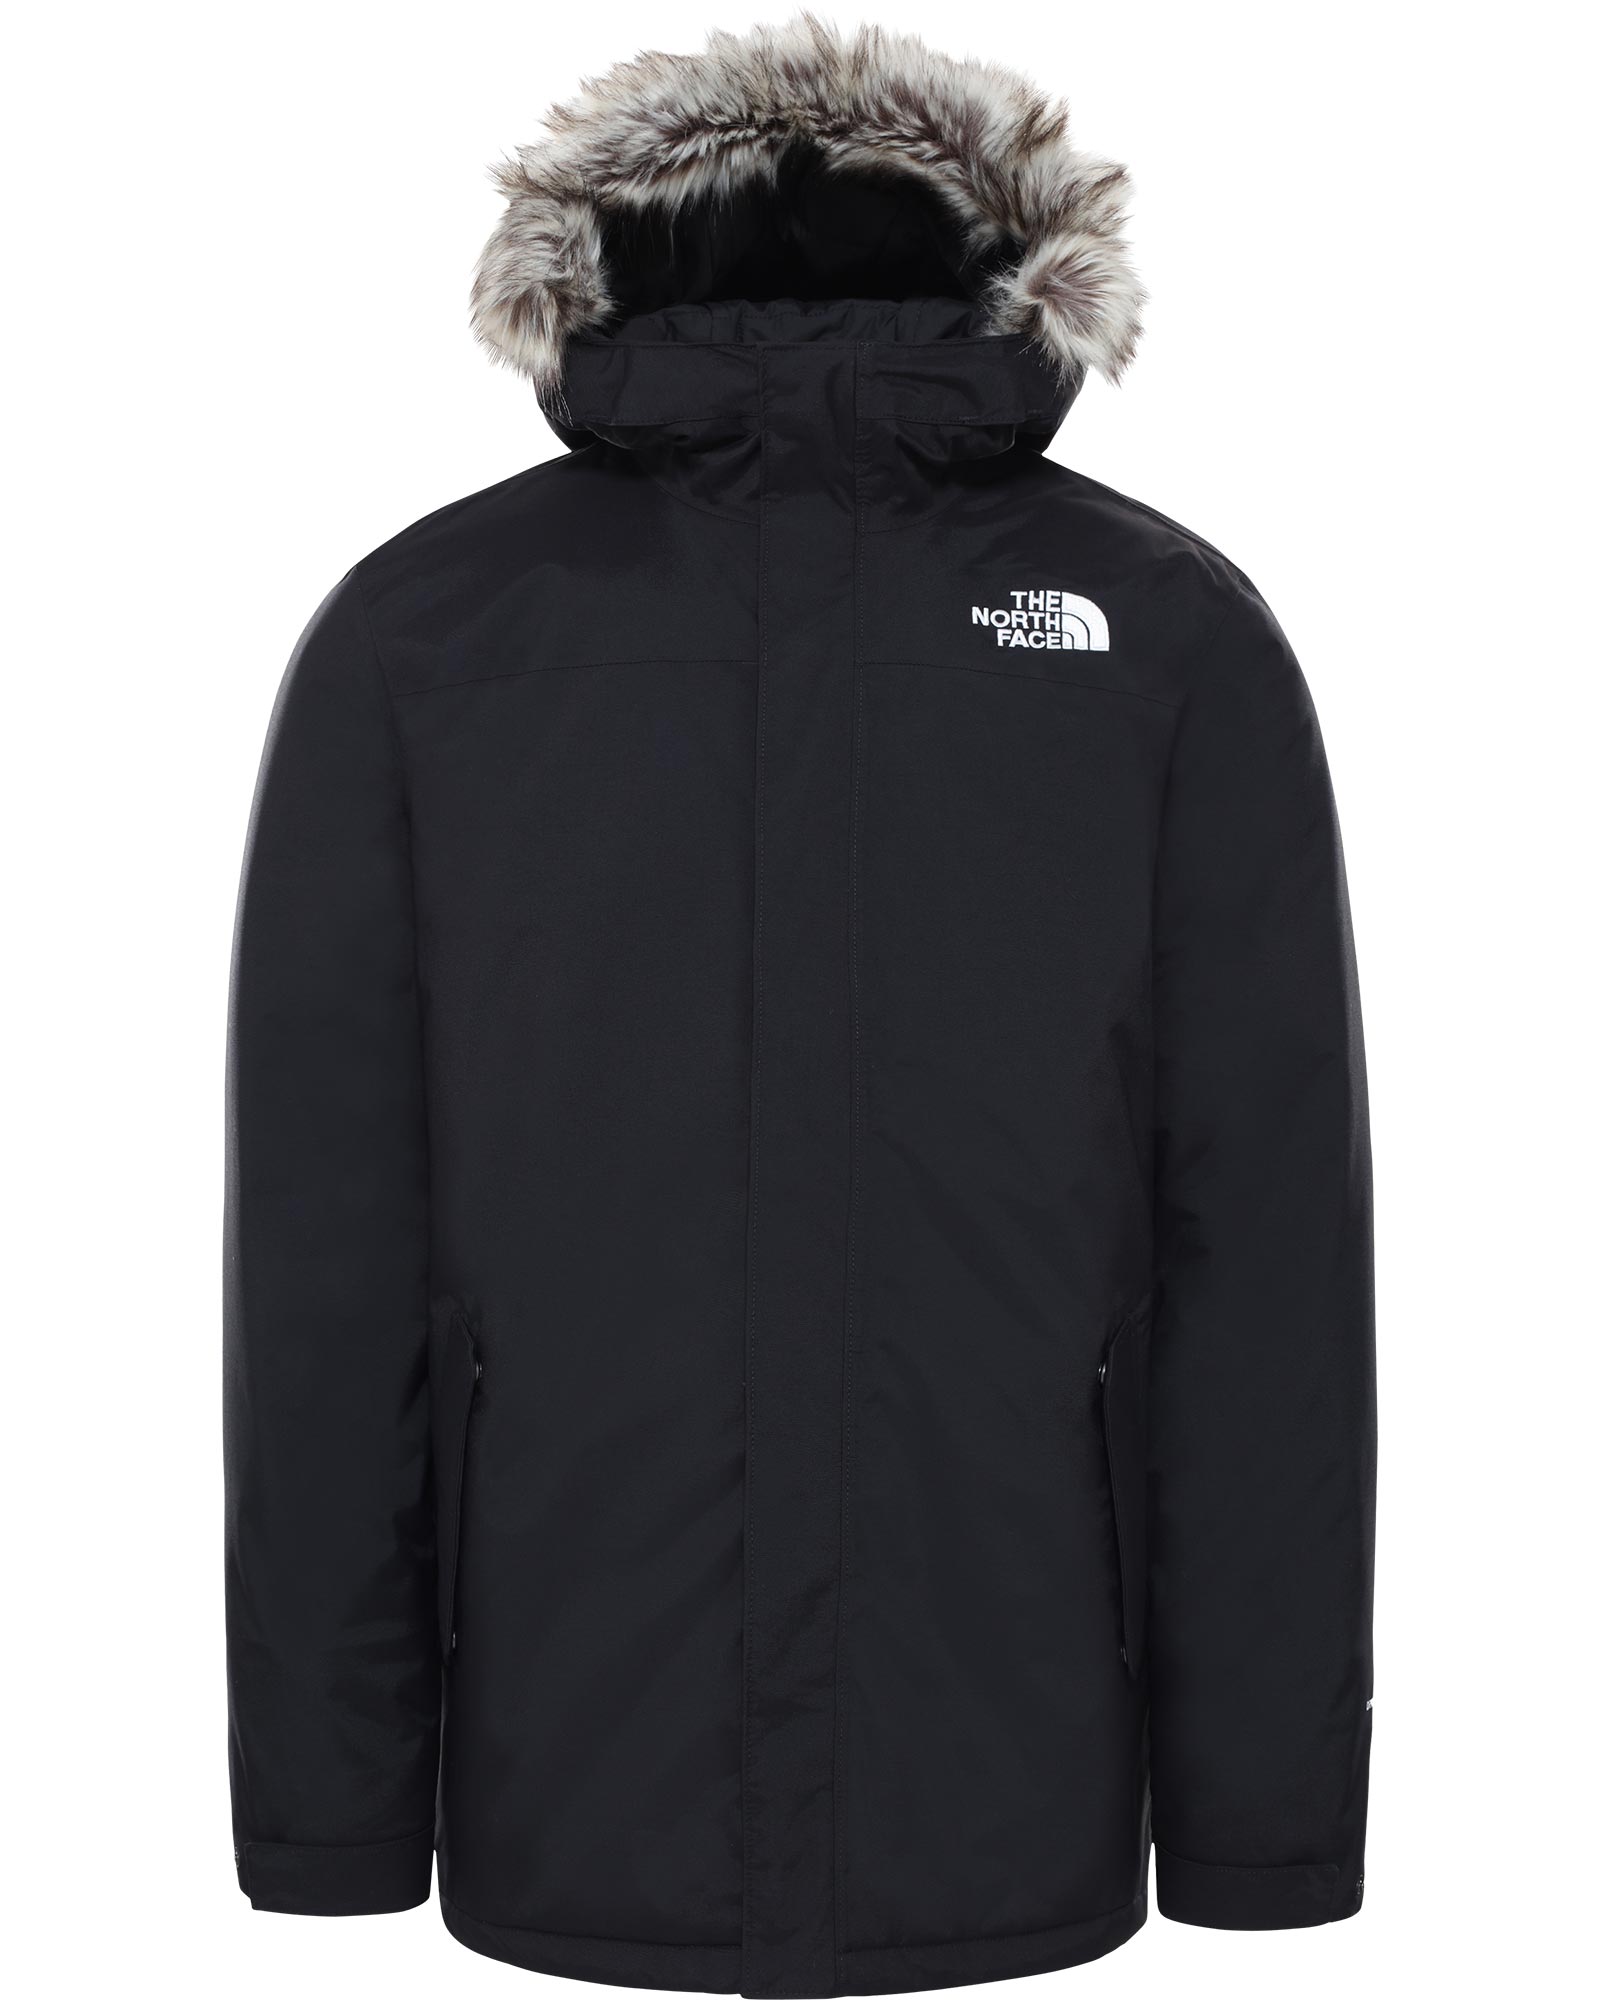 The North Face Men's Zaneck Insulated Jacket